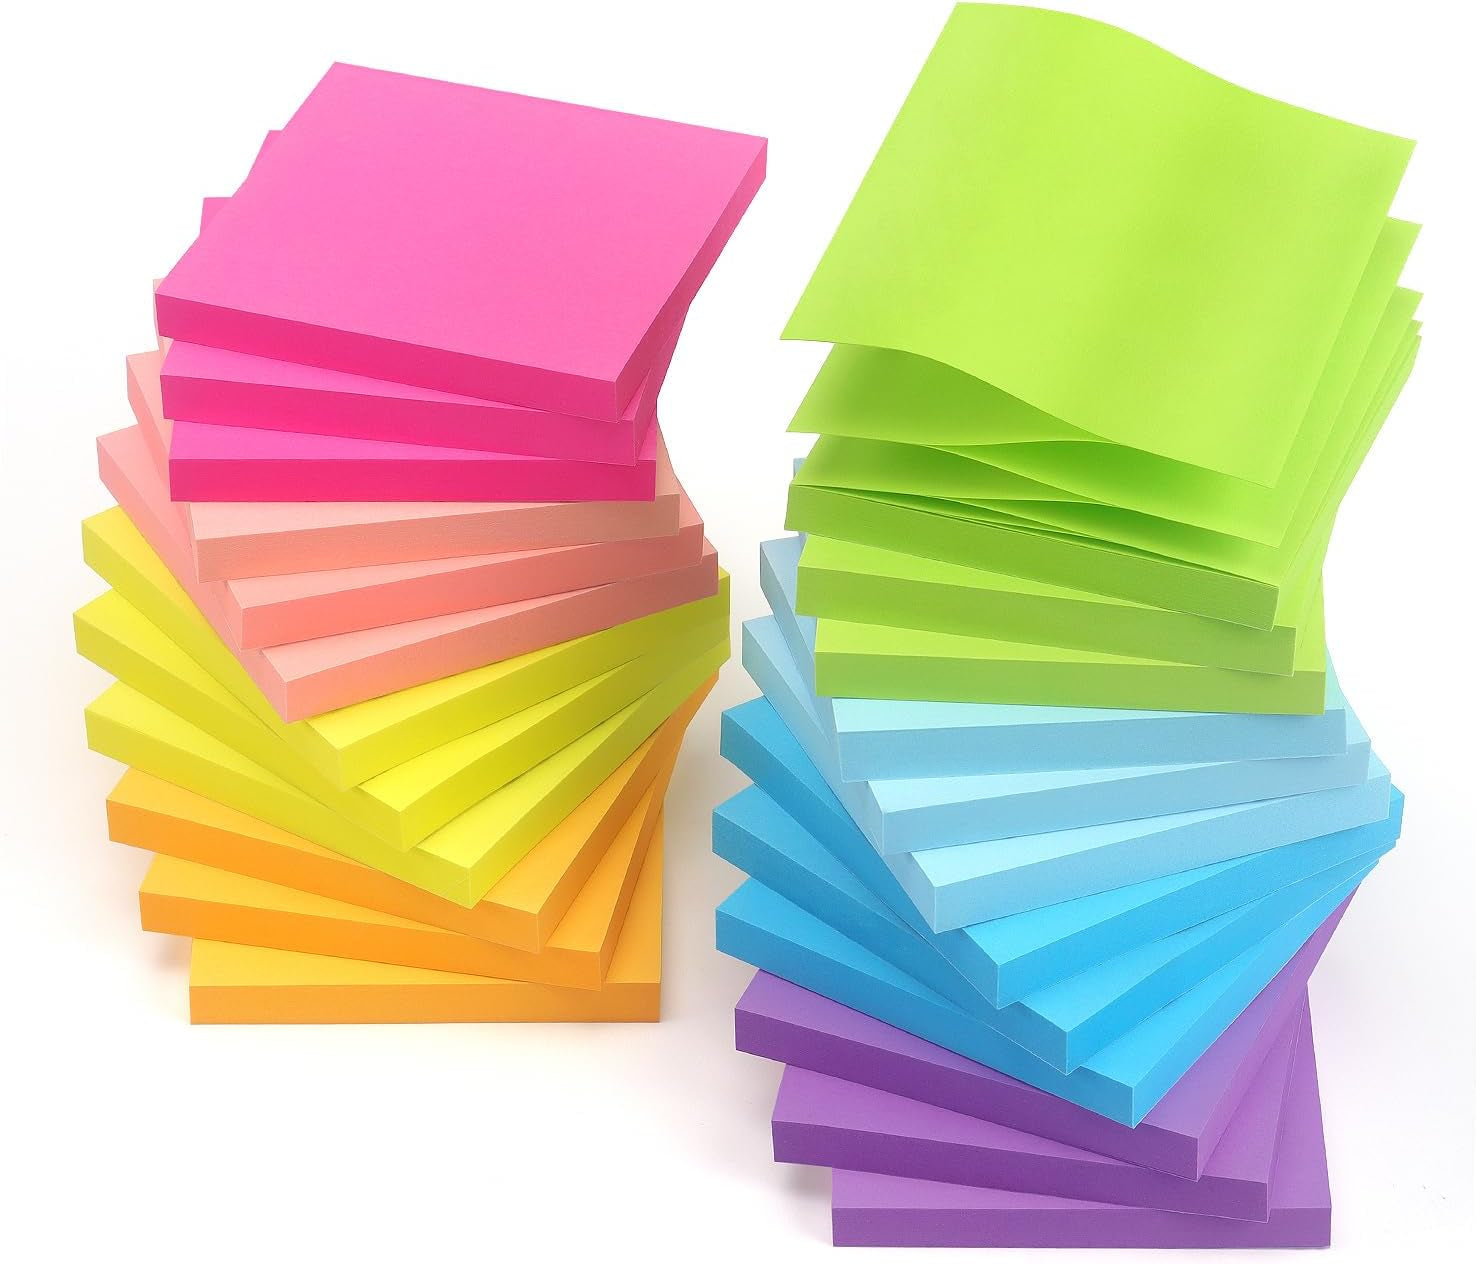 8 Pads Pop up Sticky Notes 3X3 Refills Bright Colors Self-Stick Notes Pads Super Adhesive Sticky Notes Great Value Pack